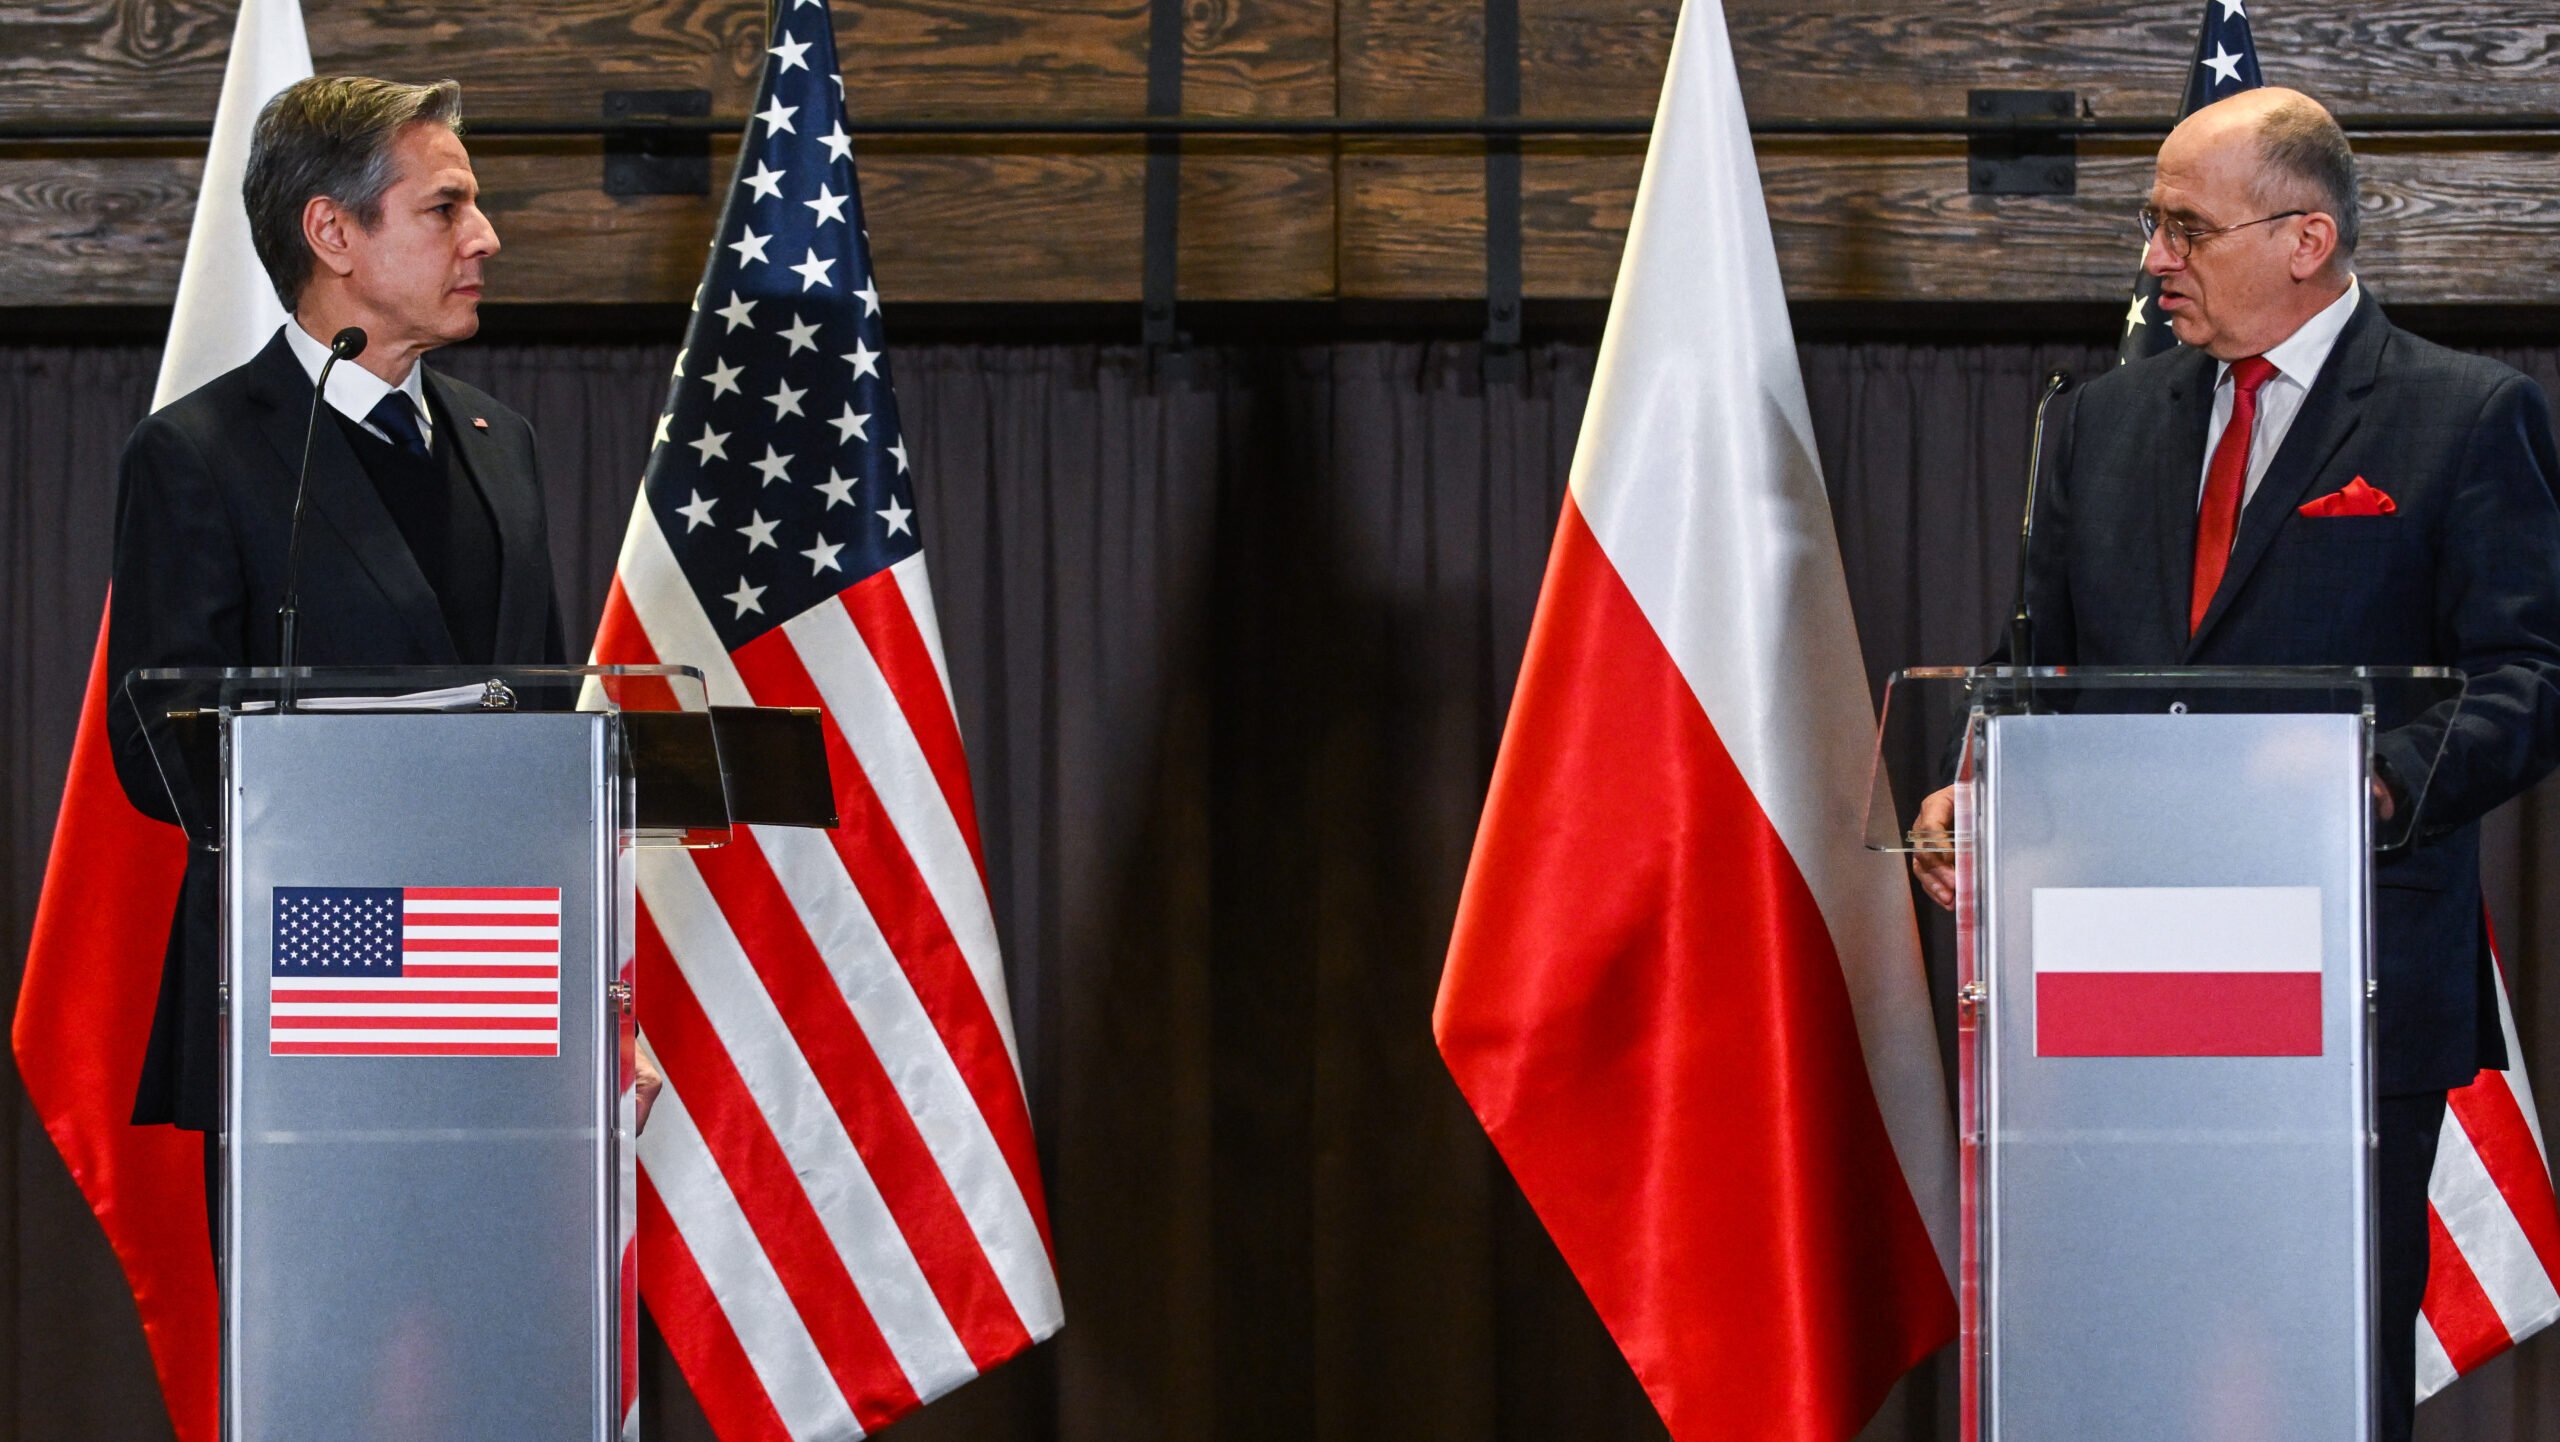 US gives $2B loan to Poland to help buy US-made weapons